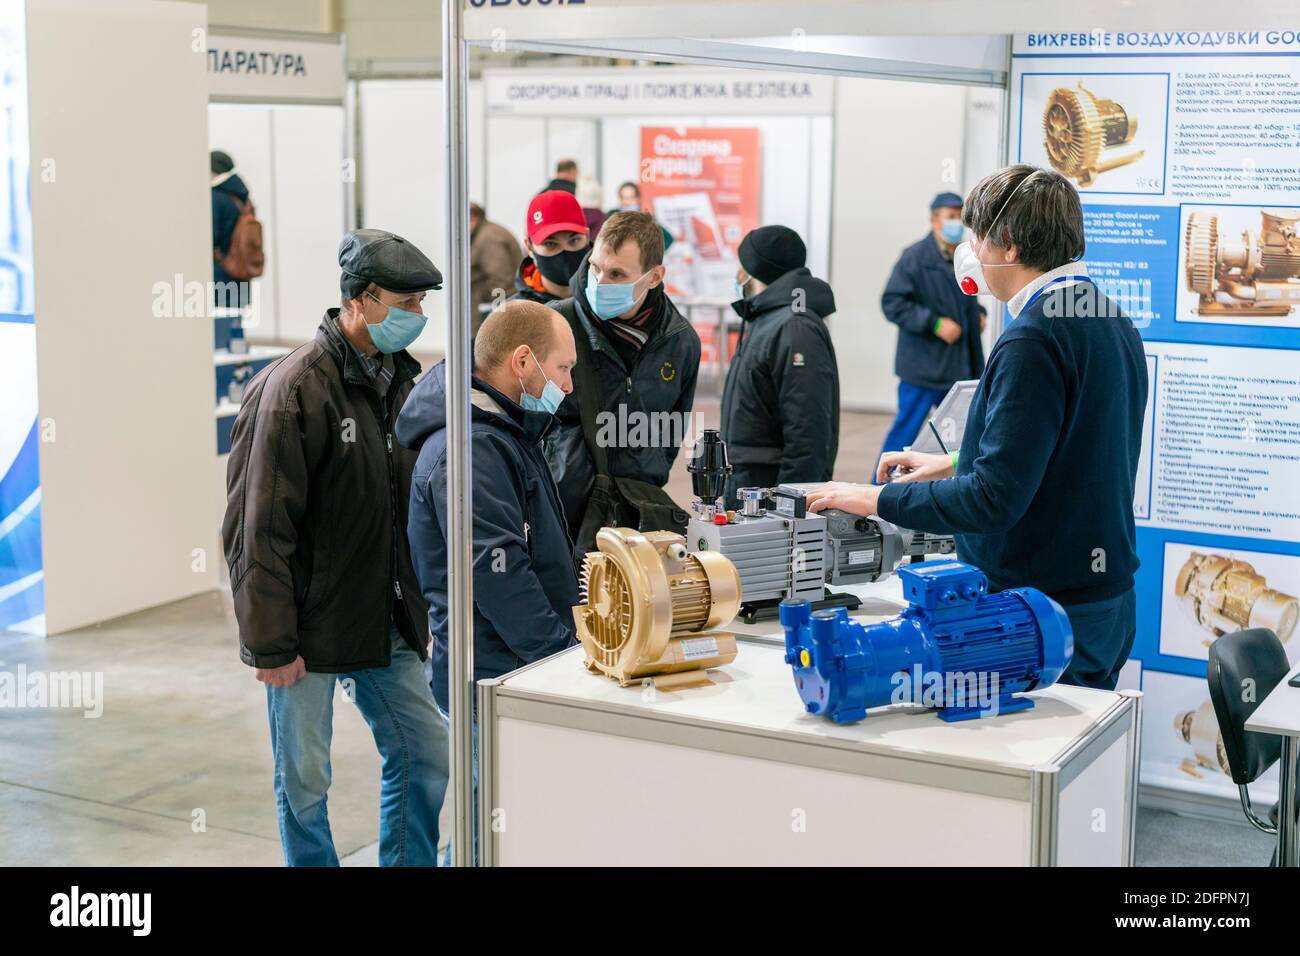 Kiev, Ukraine November 25 2020. Industrial Exhibition during a pandemic. People at the exhibition wearing medical masks. Exhibition and social Stock Photo